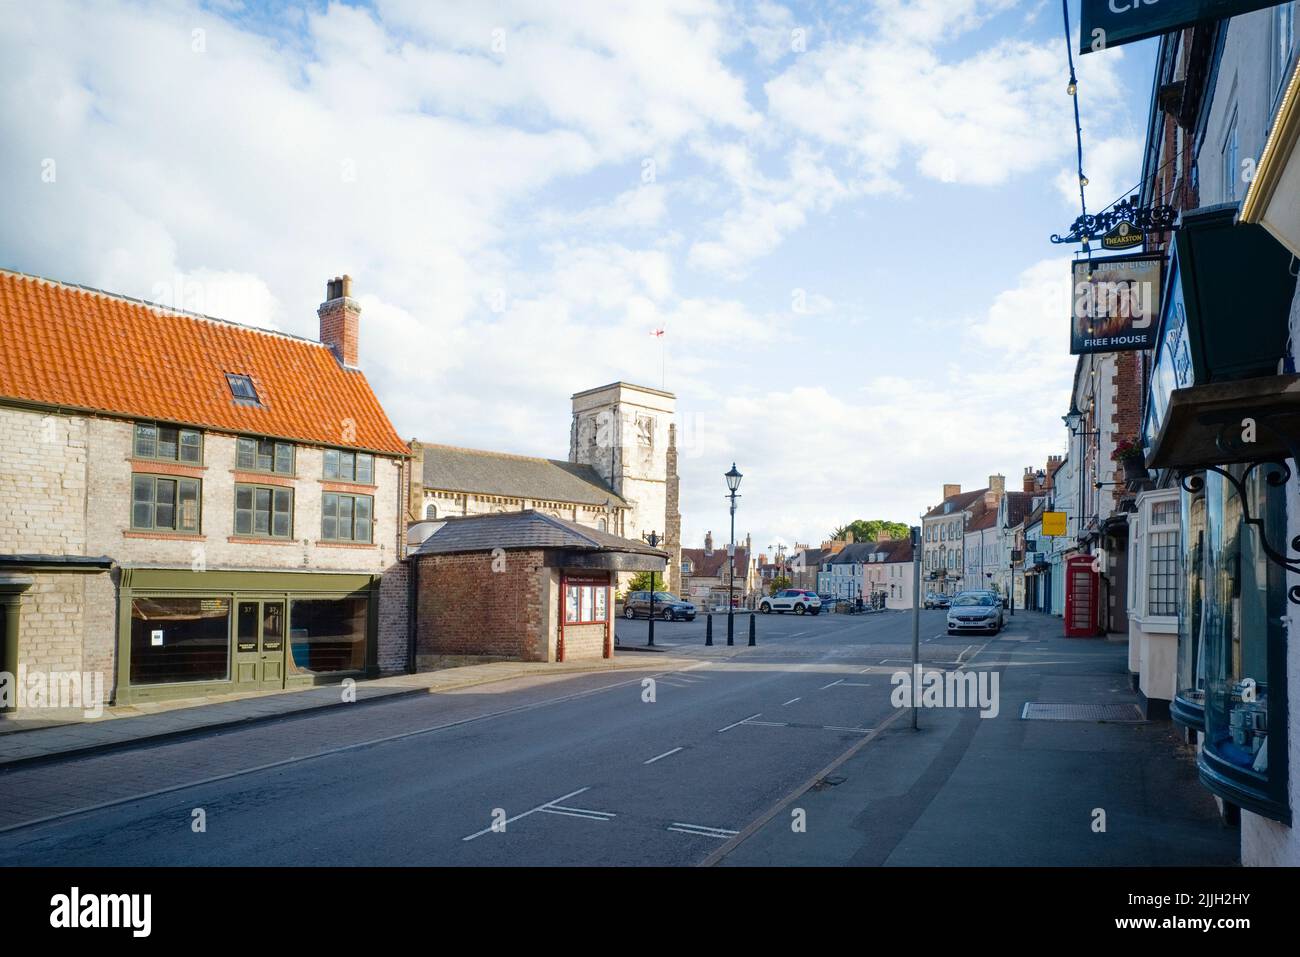 A quiet evening in the middle of Malton market town Stock Photo